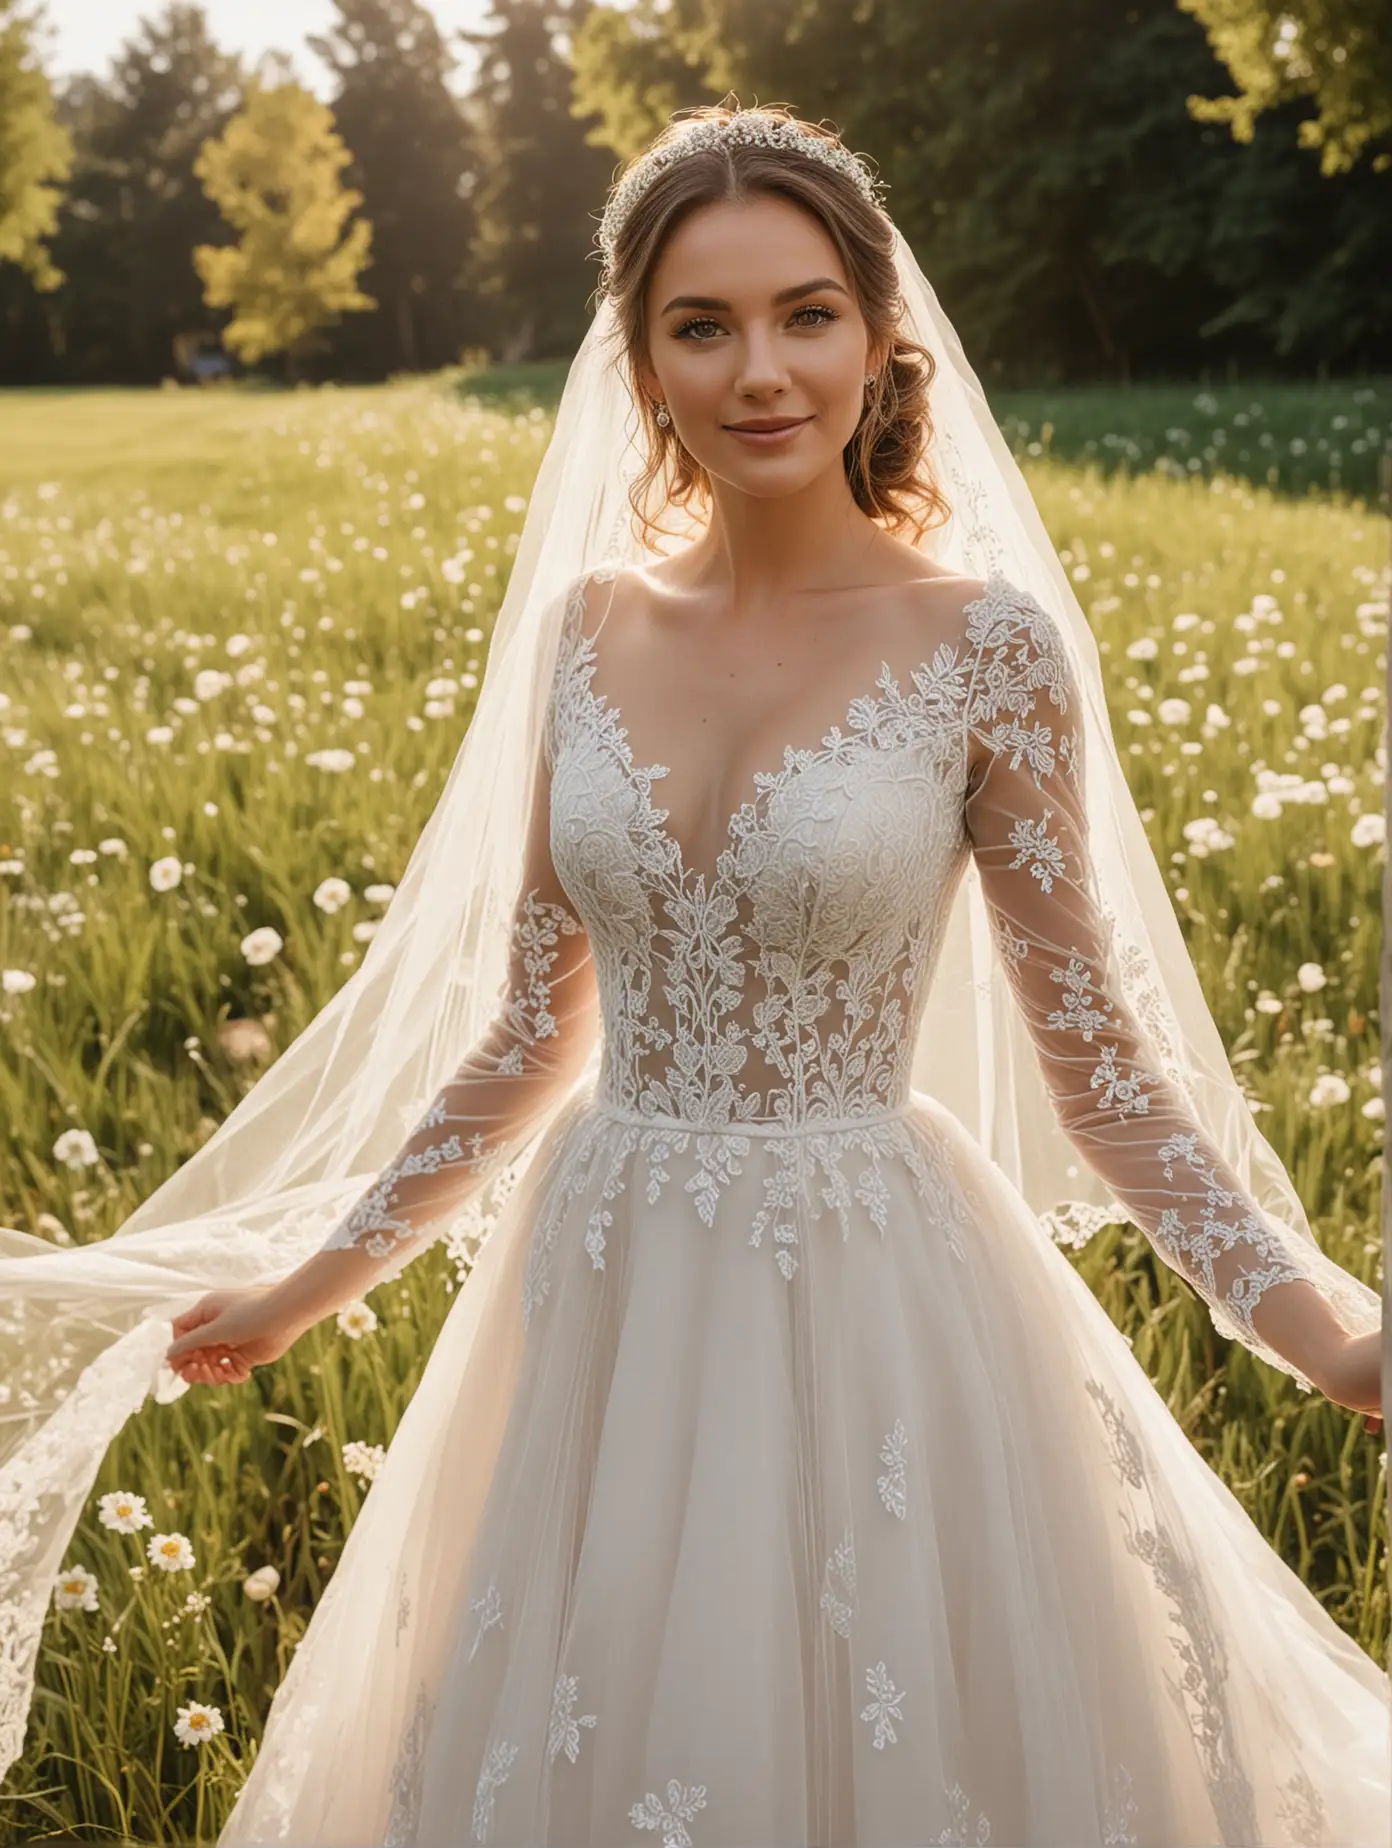 A beautiful bride is wearing a wedding dress and standing on the grass with flowers in her hands. She has elegant makeup, noble beauty, exquisite facial features, professional photography effects, and her face is radiating joy. Wearing a veil, her gown featured delicate lace details and a tulle skirt.